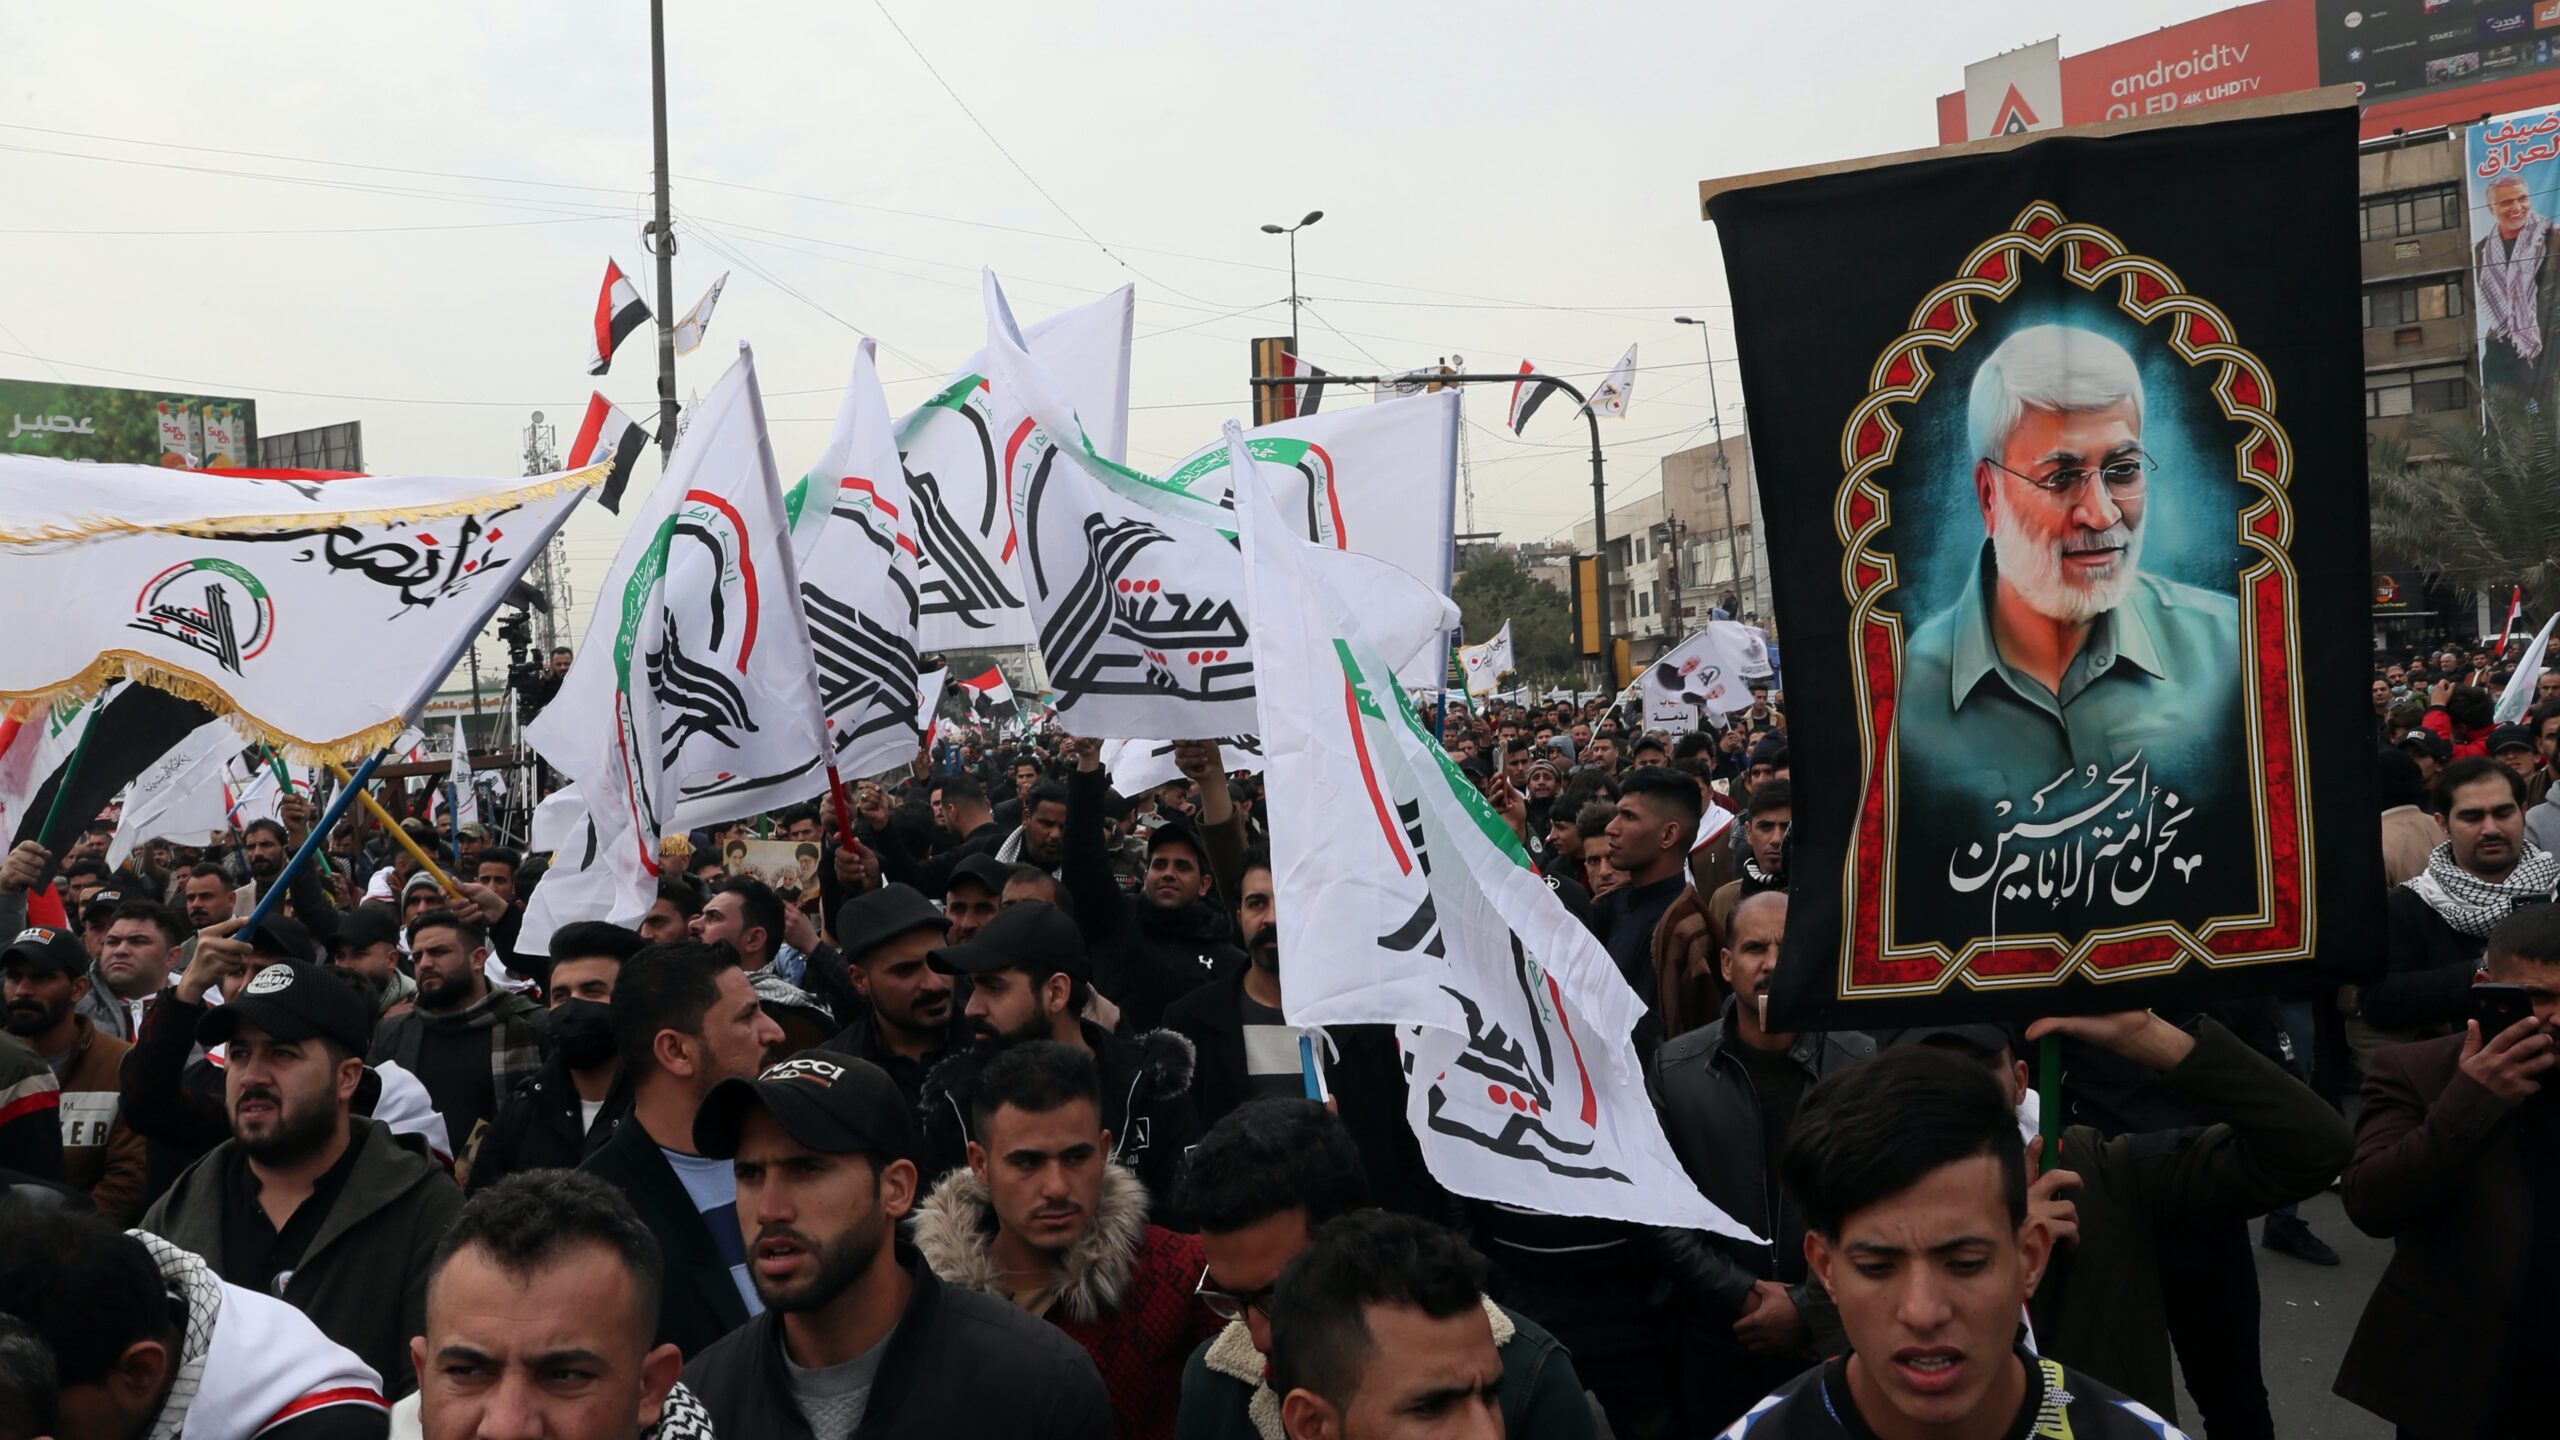 baghdad-rally-marks-anniversary-of-iranian-general&apos;s-death;-us,-israeli-flags-trampled